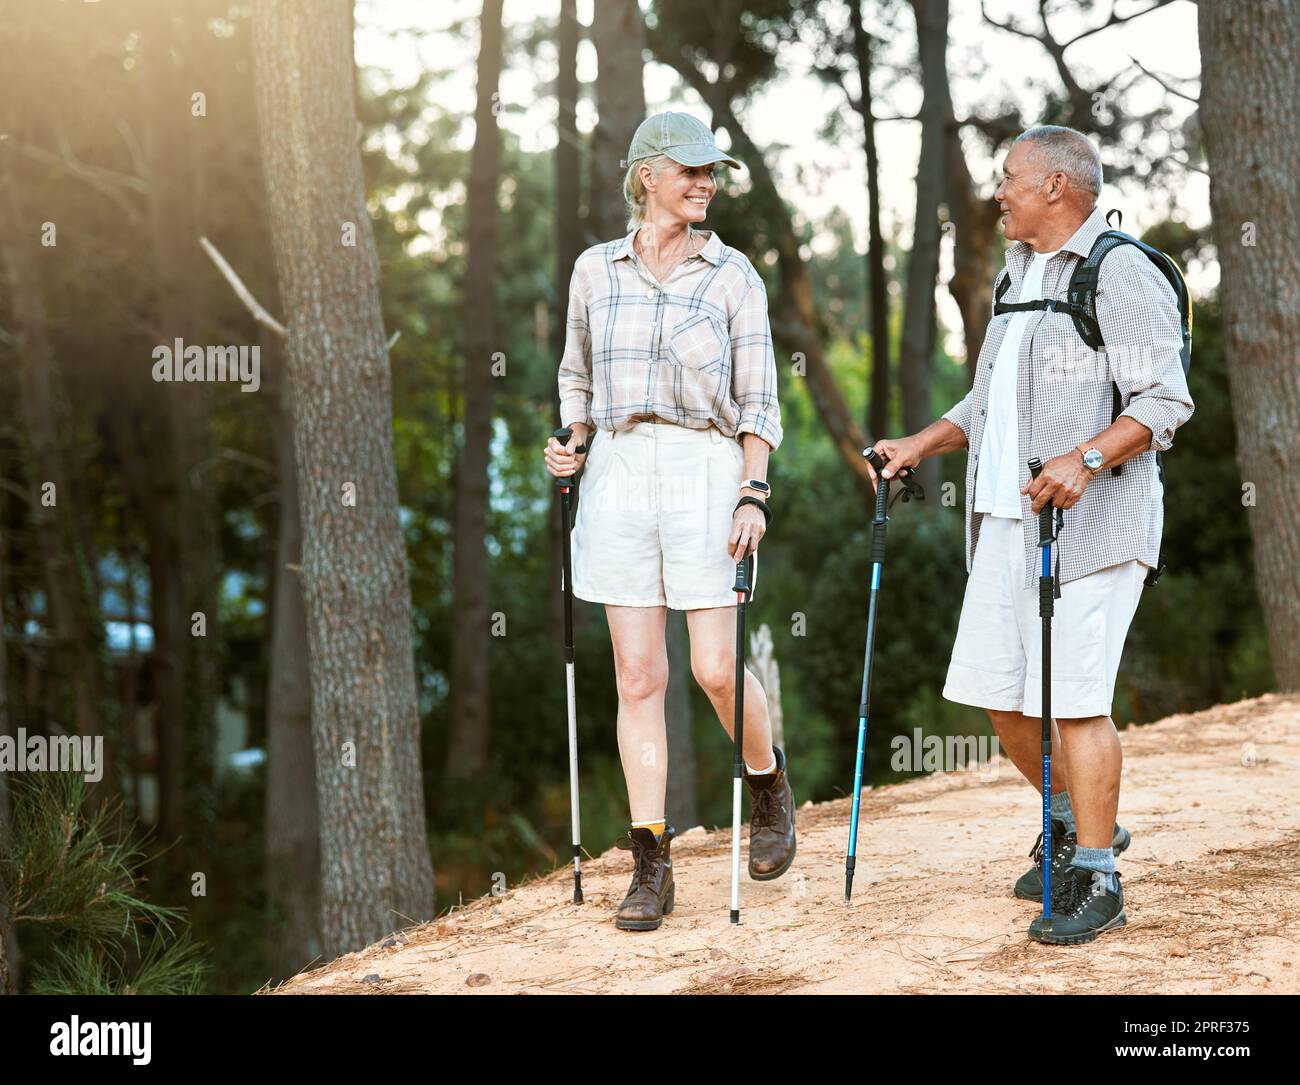 Hiking, adventure and exploring with a senior couple or friends having fun, exercising and enjoying the outdoors. Walking, discovering and journey with old people talking in nature, forest or woods Stock Photo